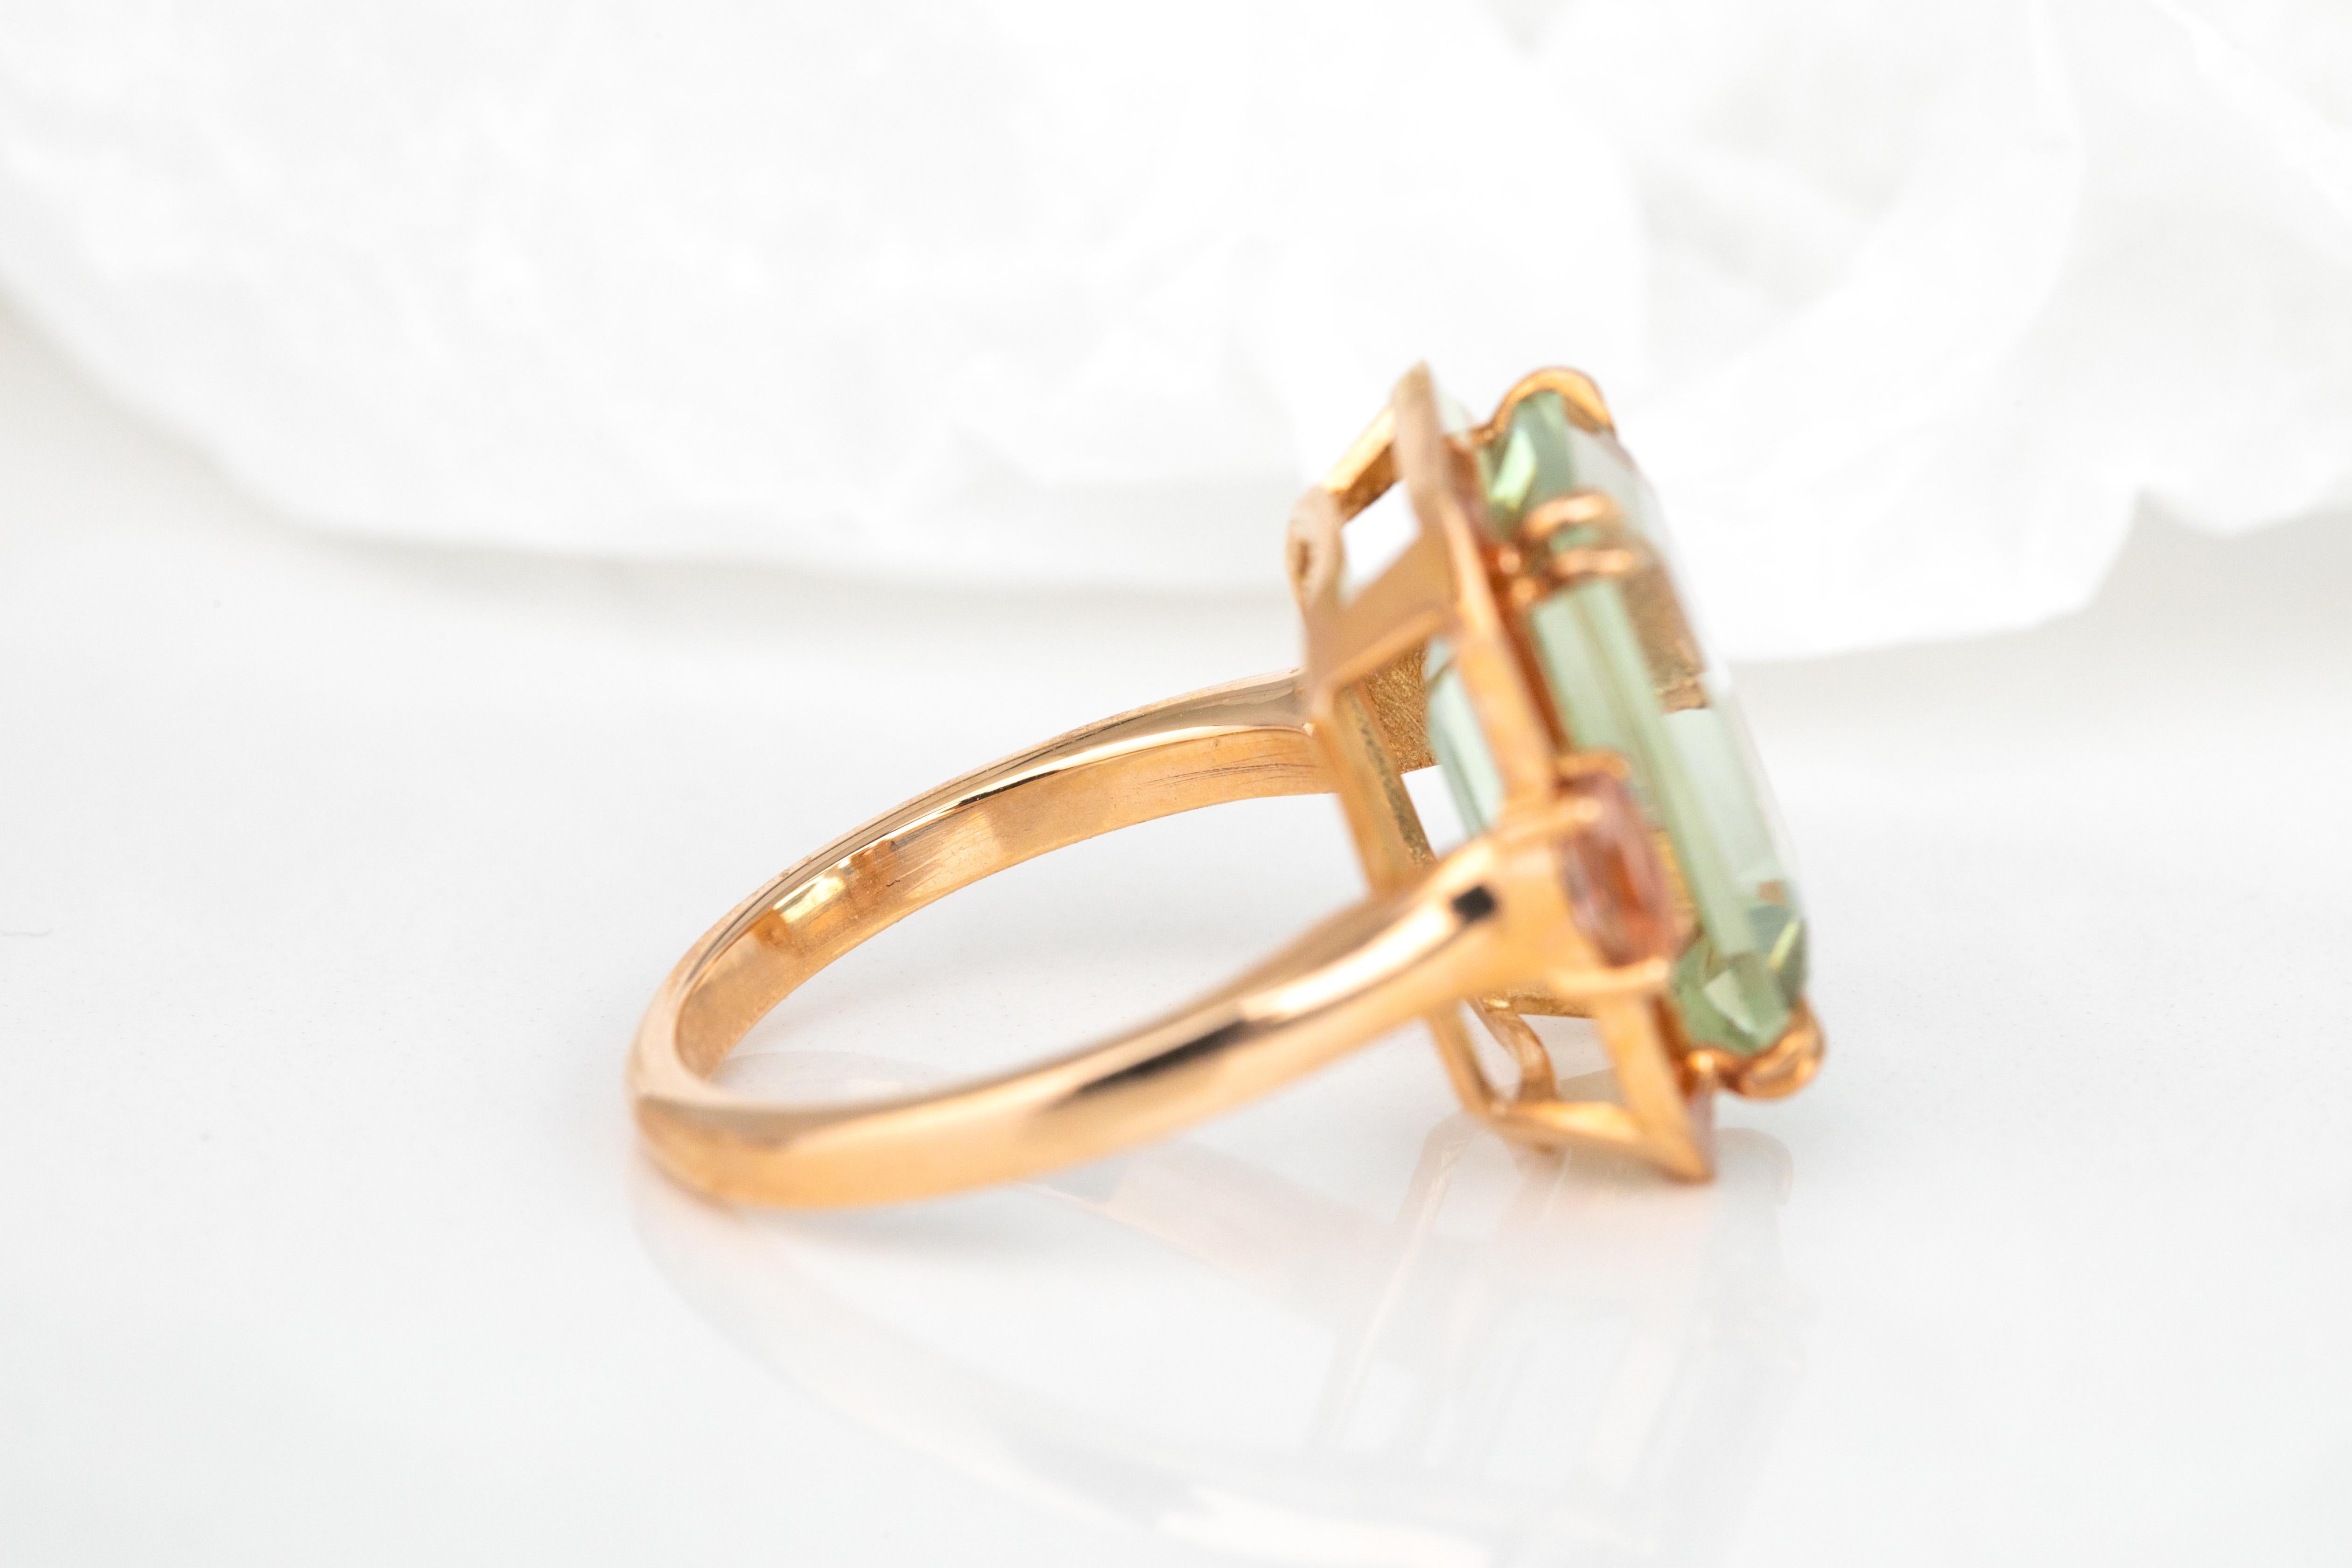 For Sale:  Artdeco Style Ring, 14k Solid Gold, Green Amethyst and Pink Tourmaline Stone Ring 3